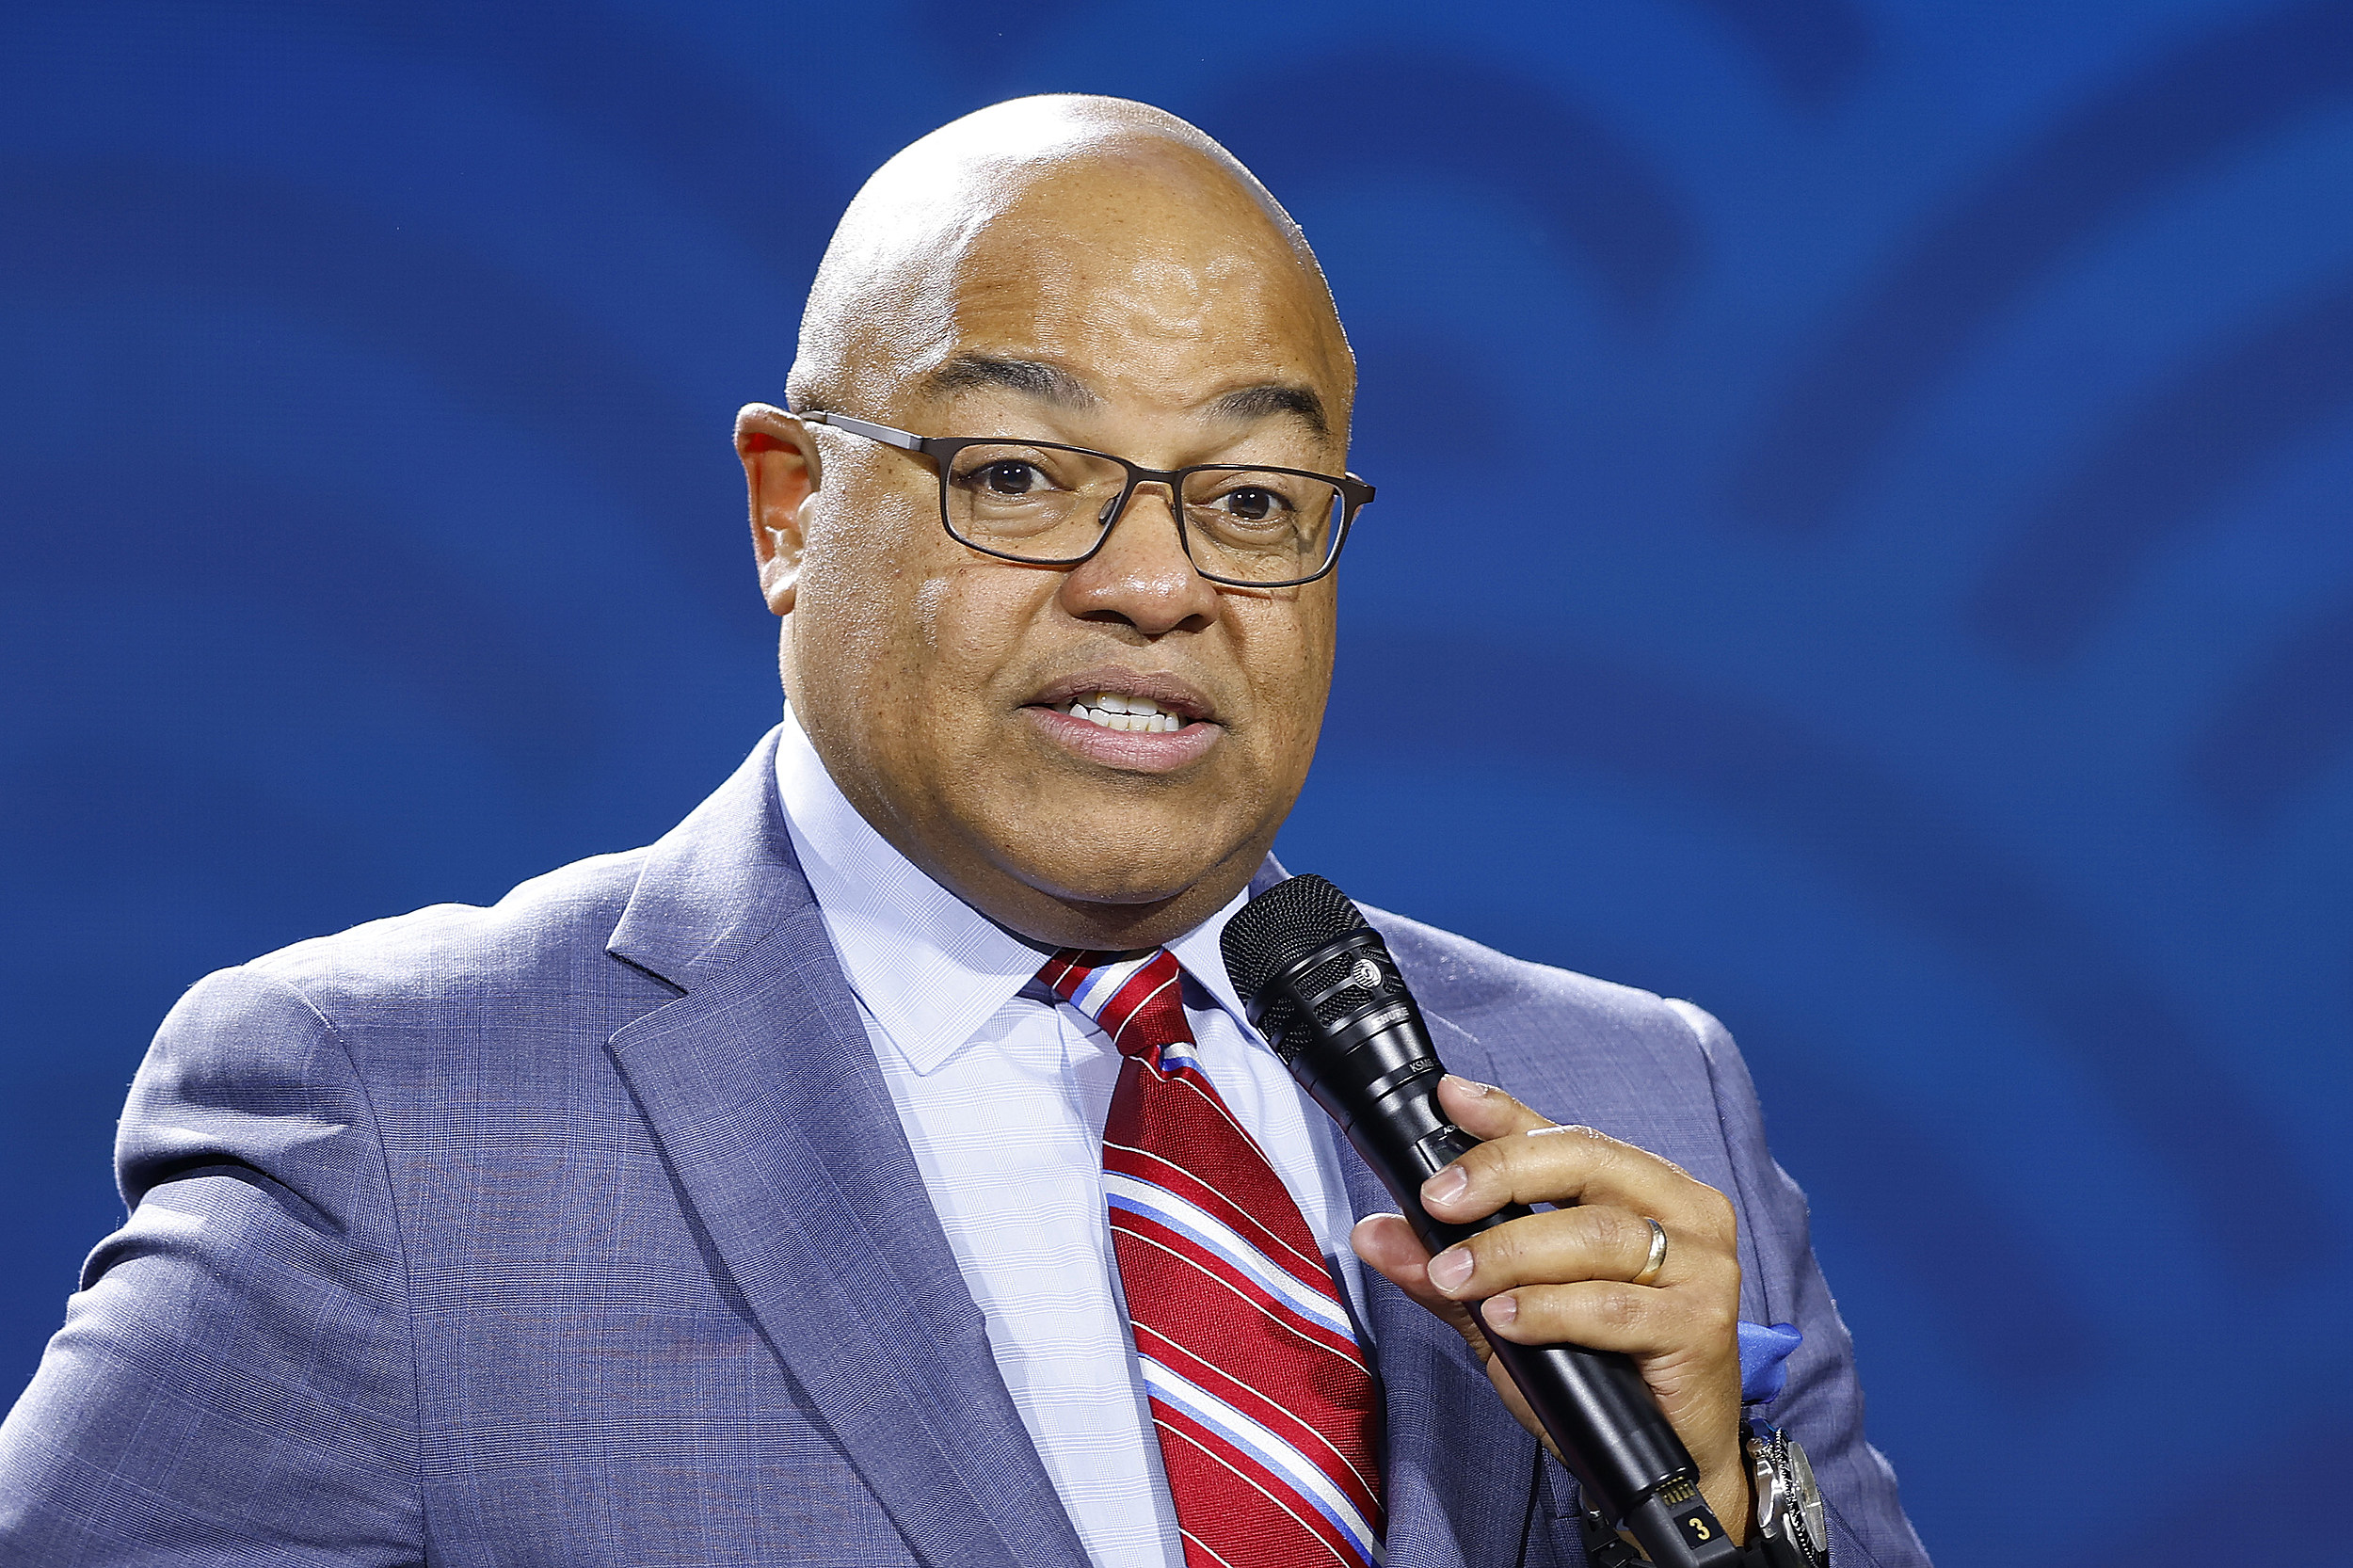 Mike Tirico to join Cris Collinsworth on NBC's 'Sunday Night Football'